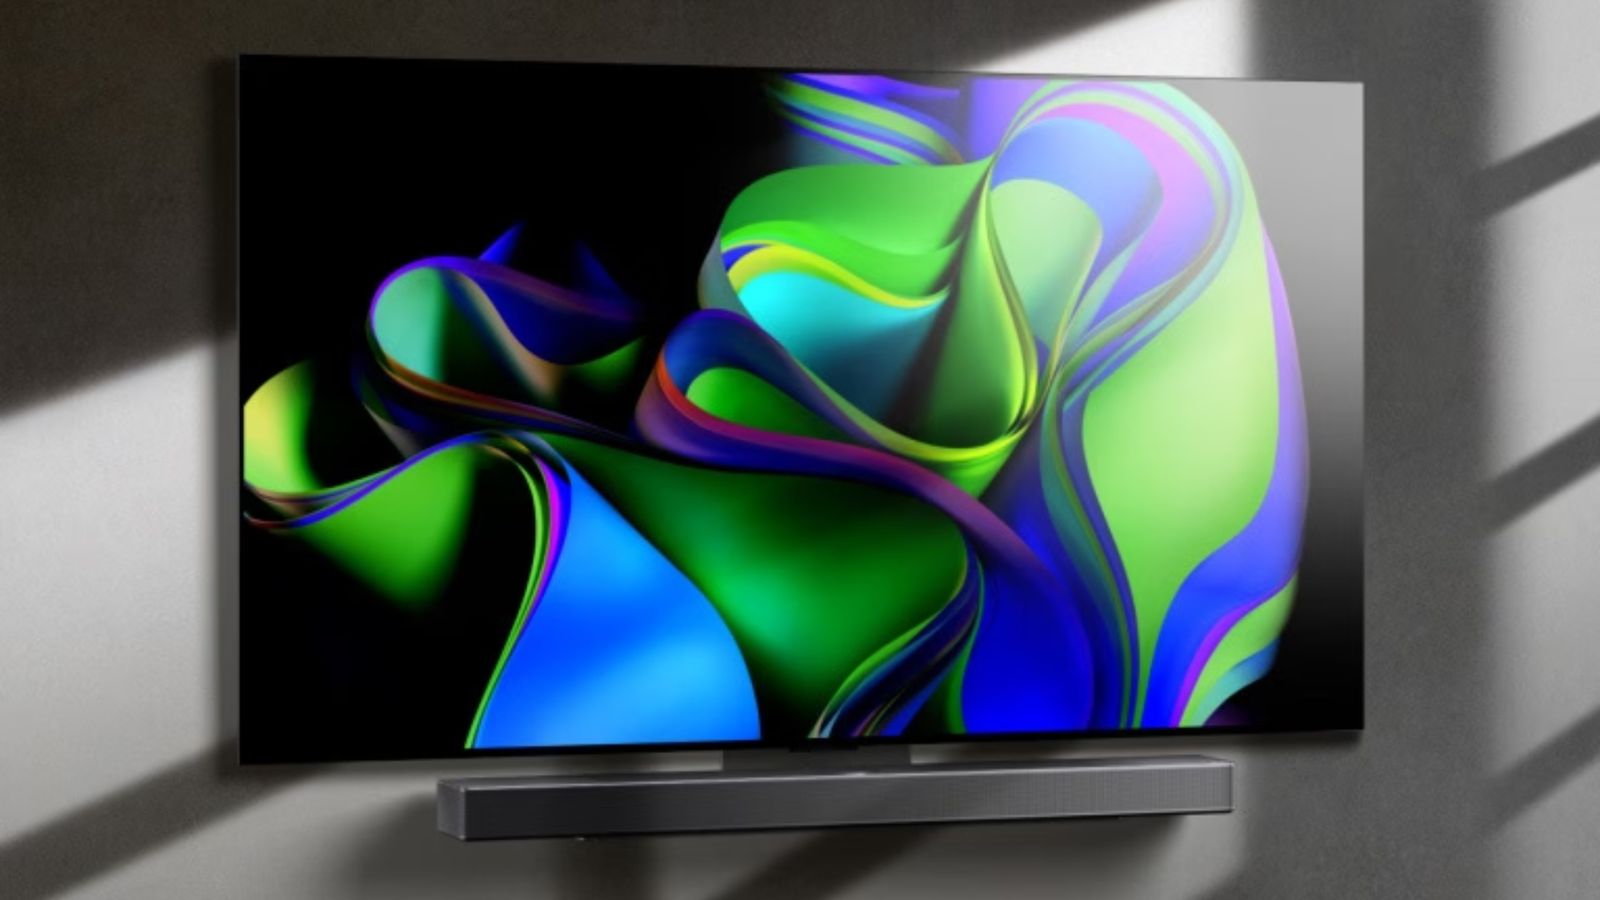 LG C3 TV mounted onto a grey wall featuring a green and blue pattern on the display.